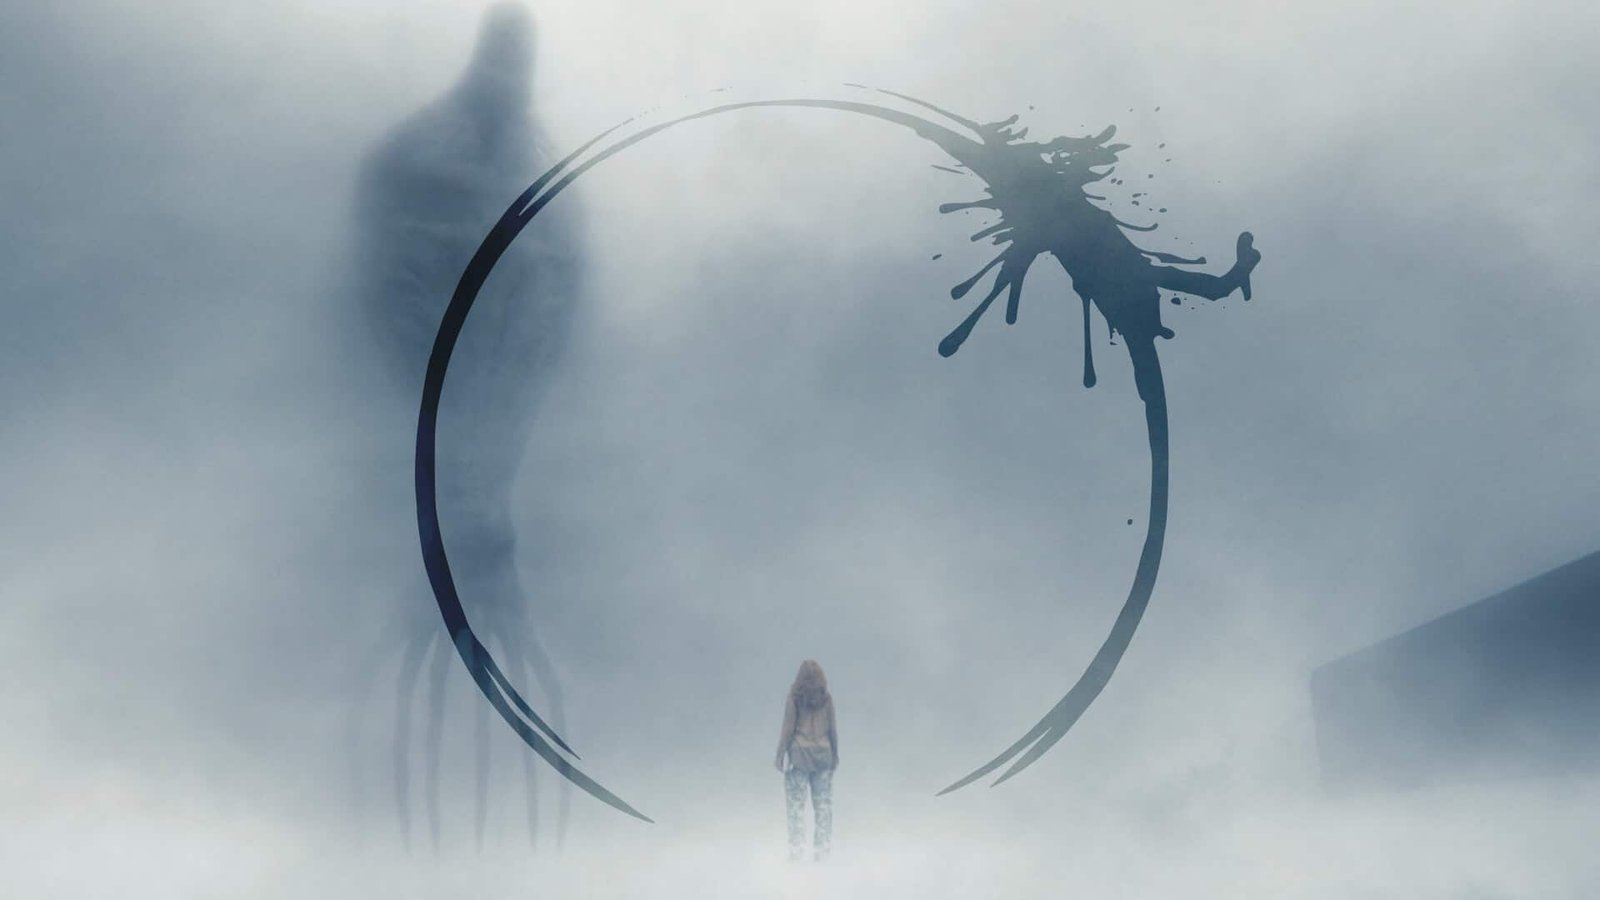 movie review the arrival